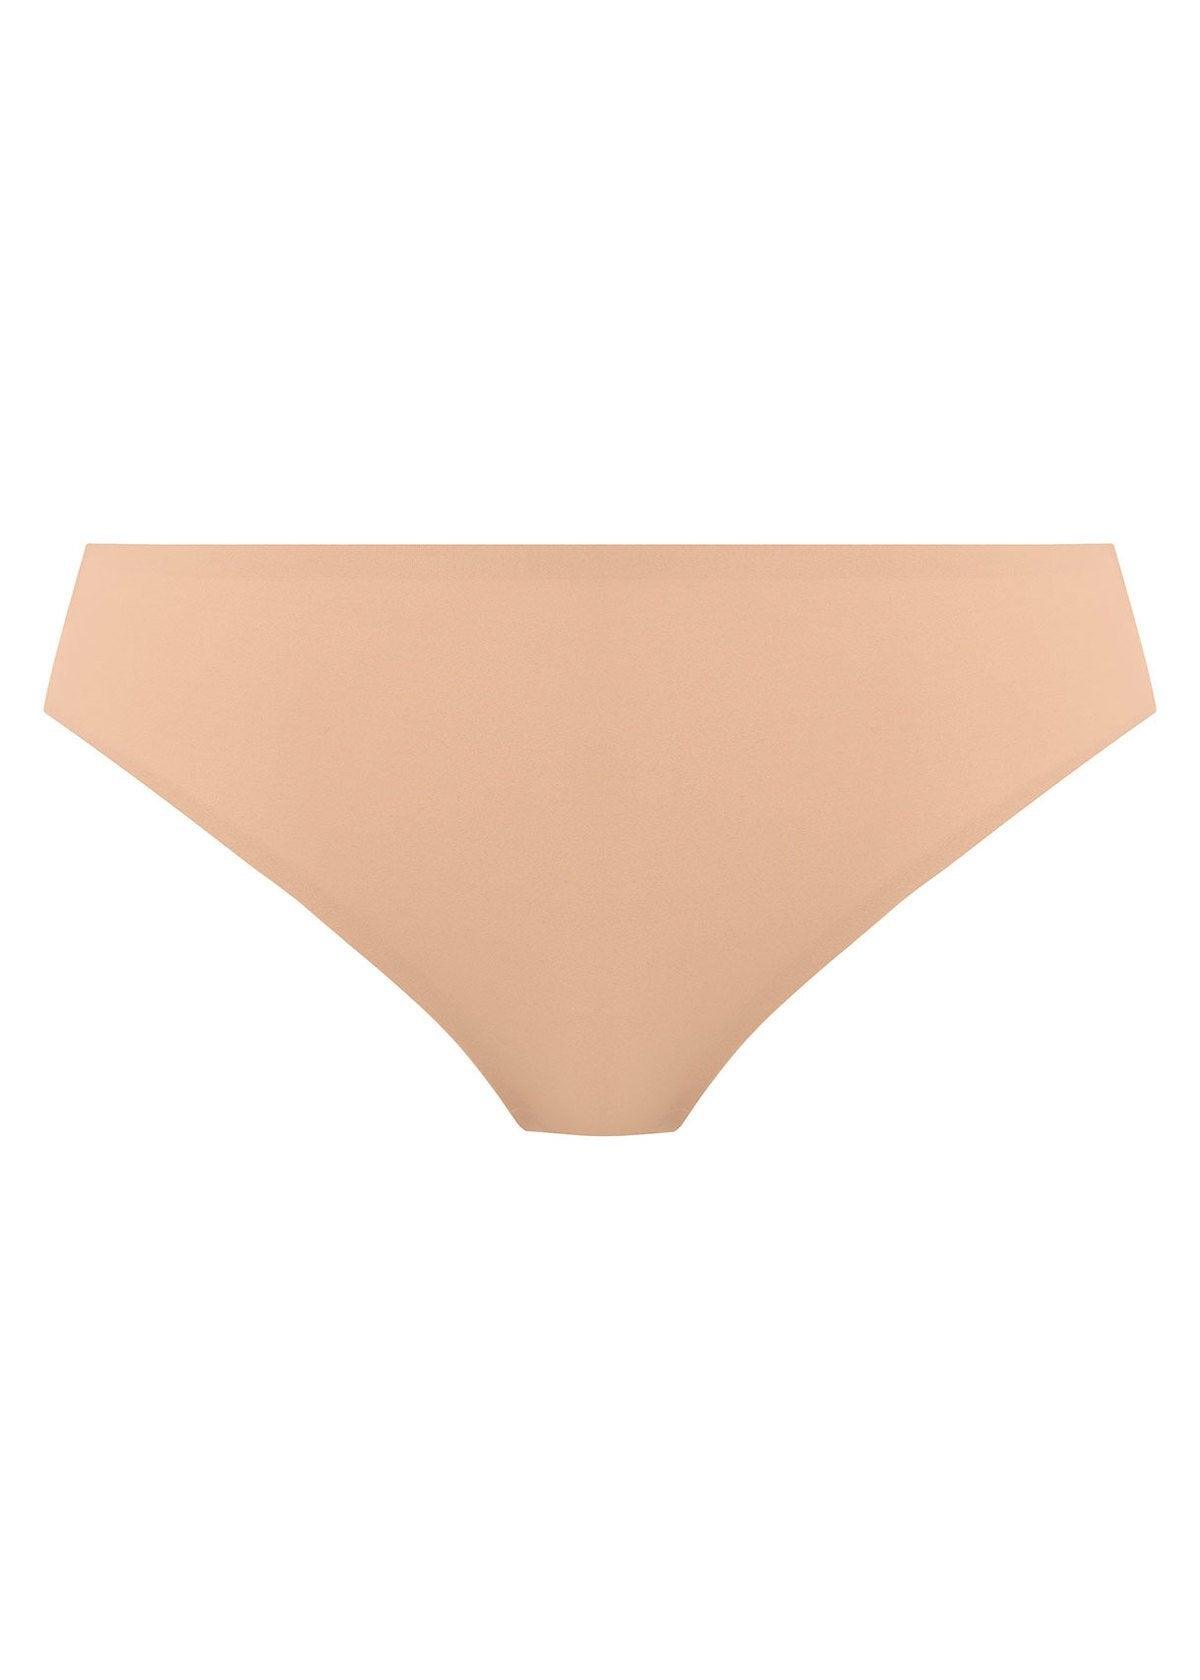 Fantasie "Smoothease" Natural Beige Invisible Stretch Thong